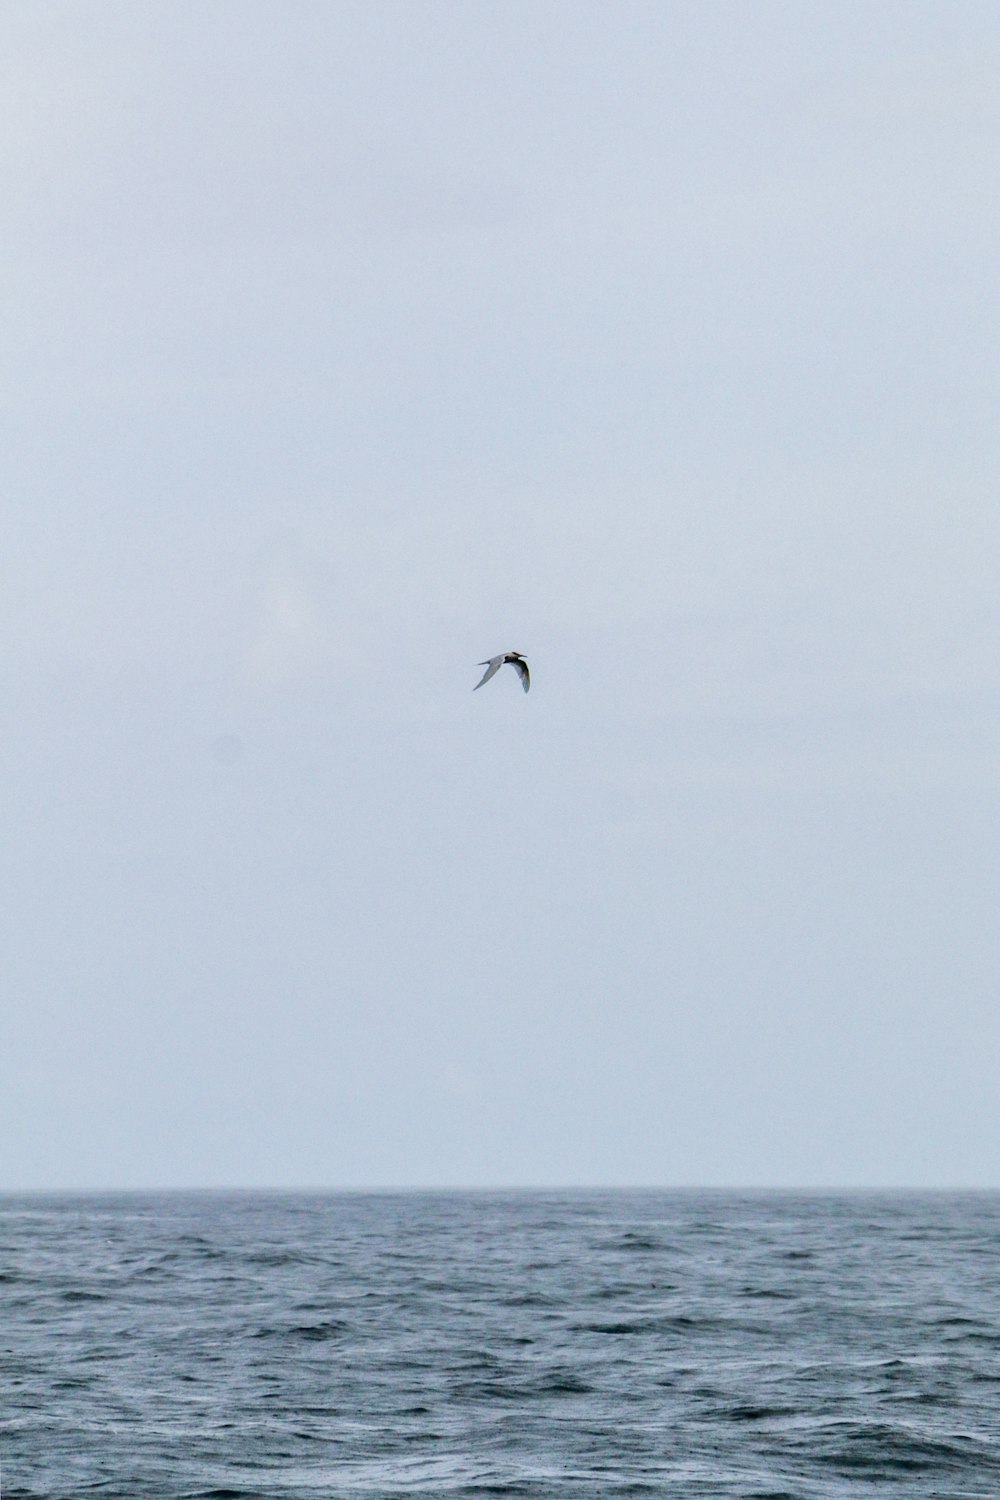 a bird flying over the ocean on a cloudy day